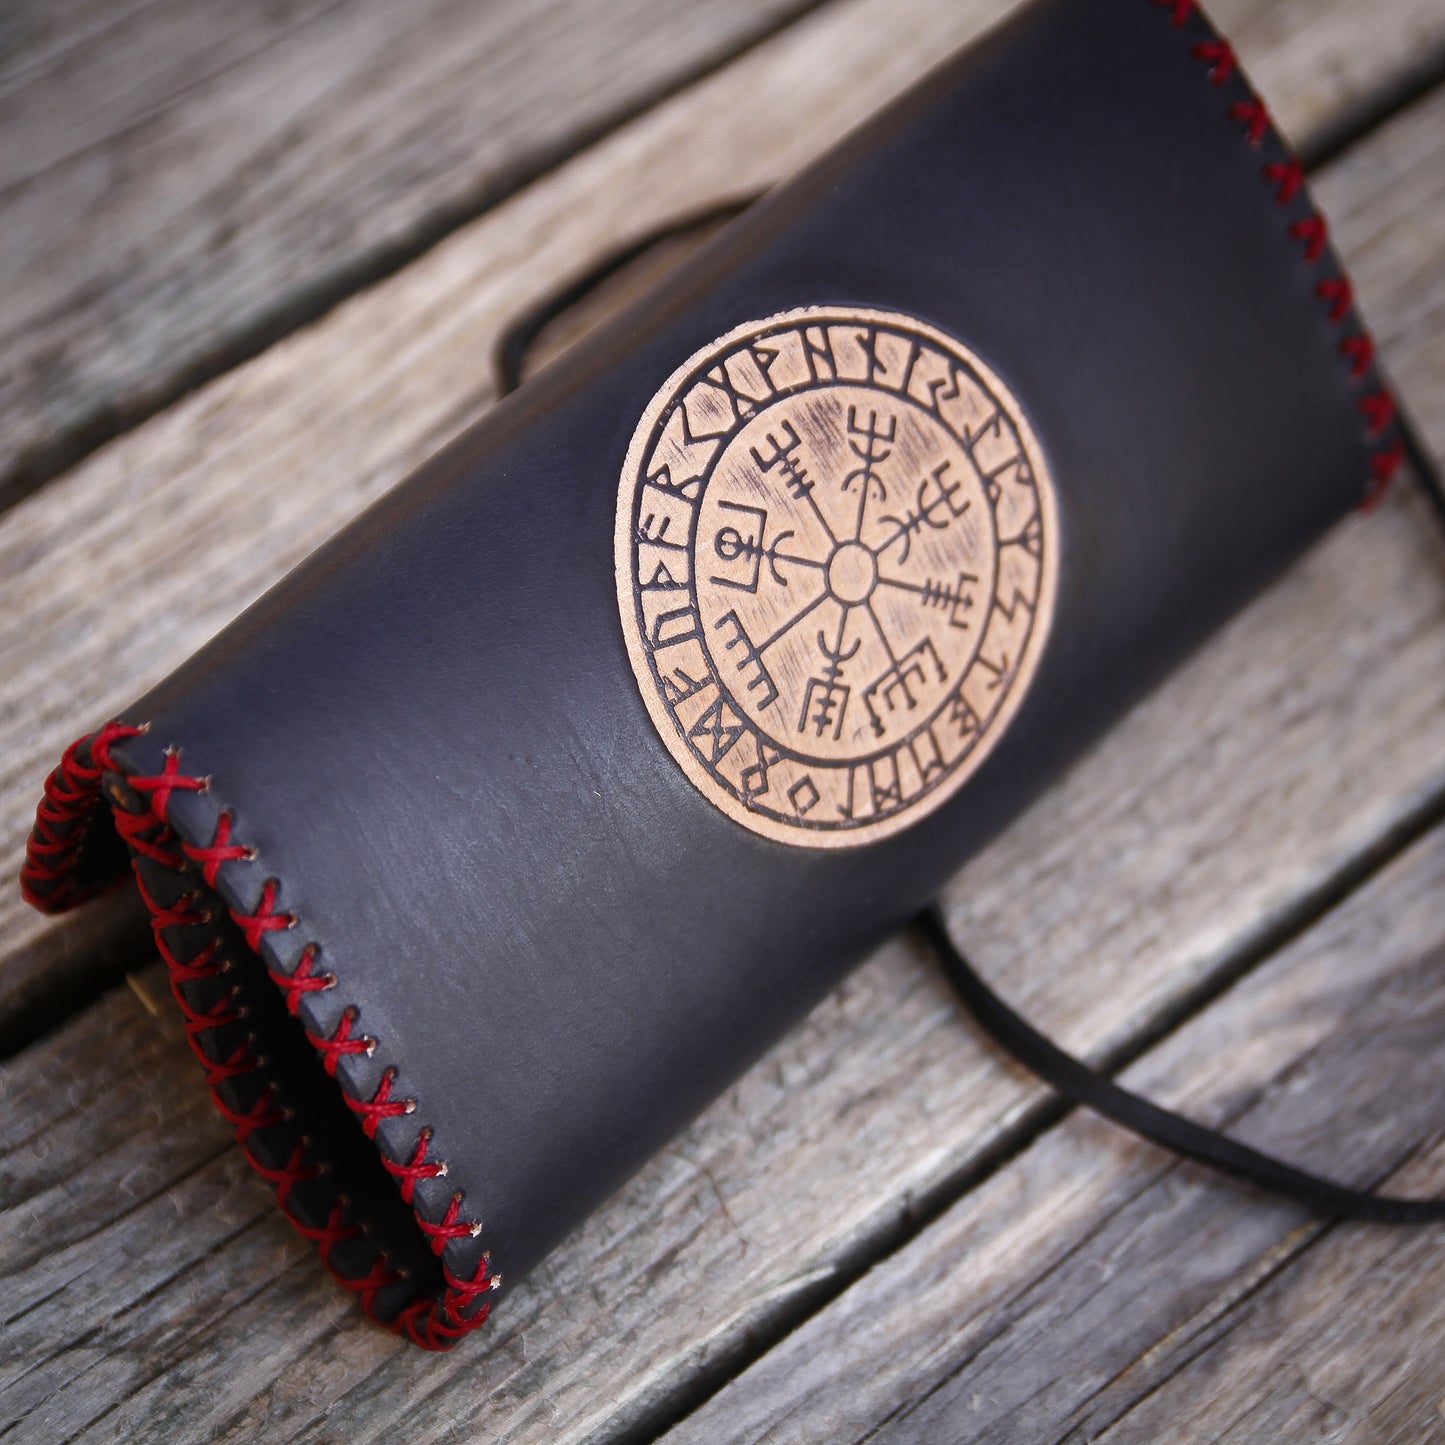 Tobacco pouch leather // tobacco pouch leather // Vegvisir // Nordic compass // rolling bag leather // gift Father's Day // gift for smokers